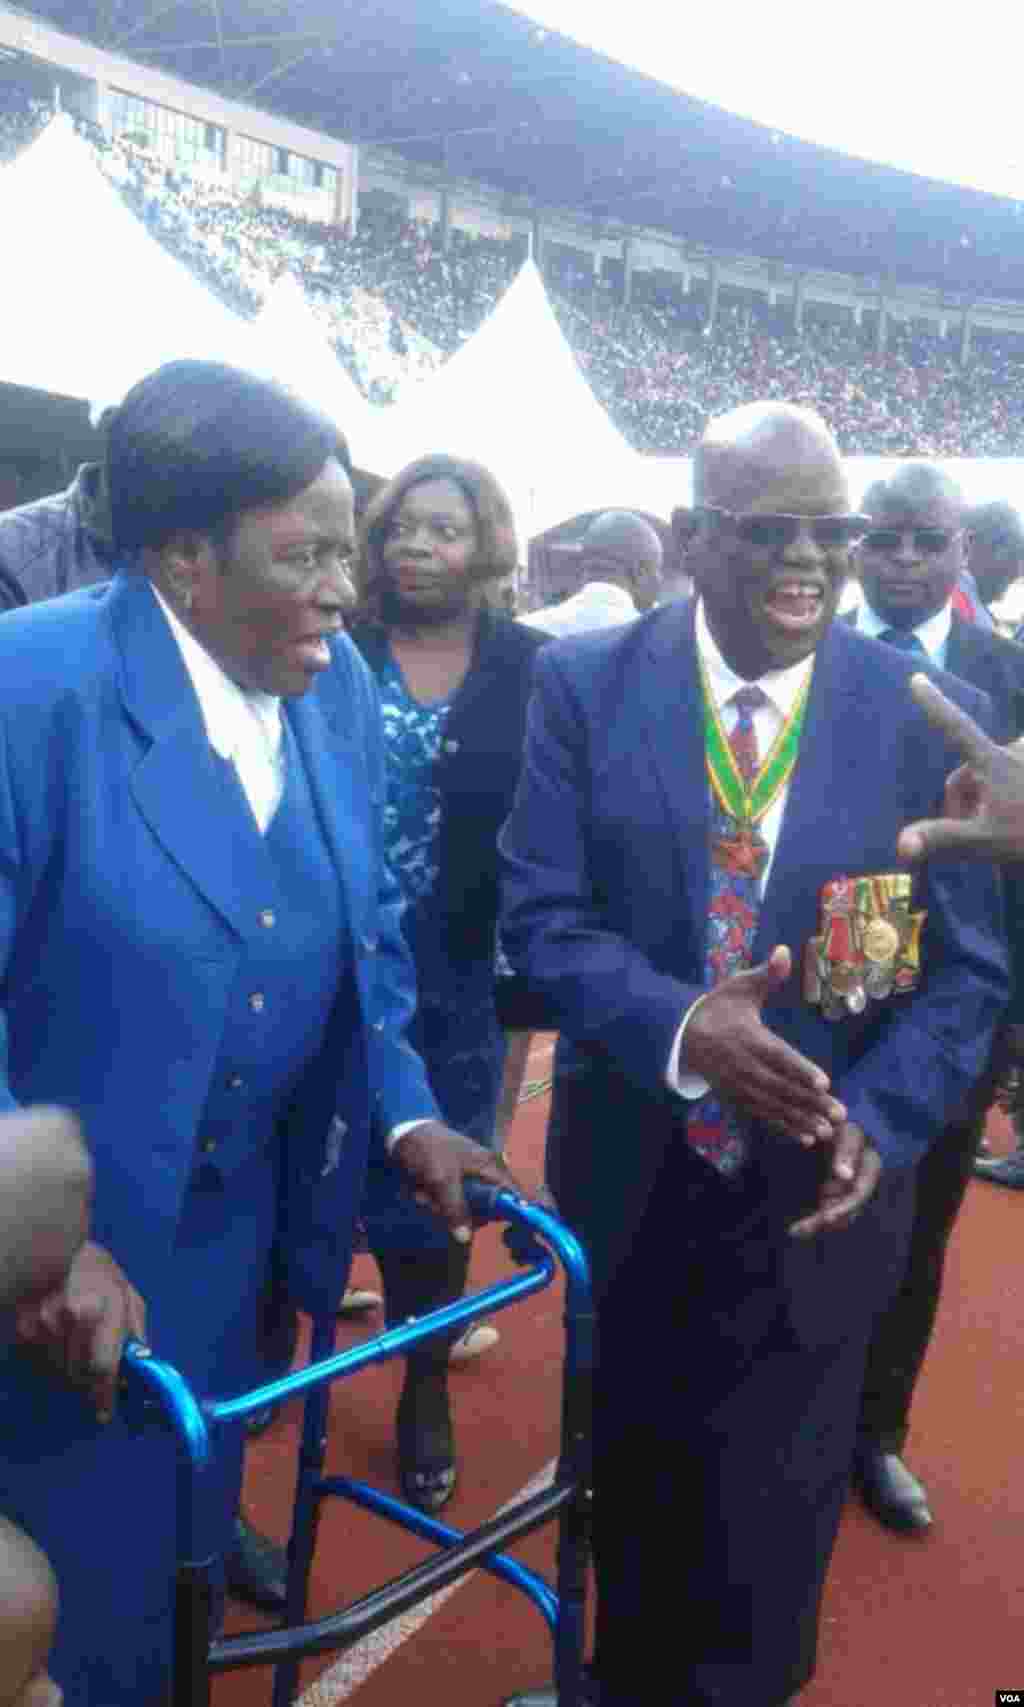 Maud Muzenda, the wife of former Vice President Simon Muzenda, also attended the independence commemorations in Harare.